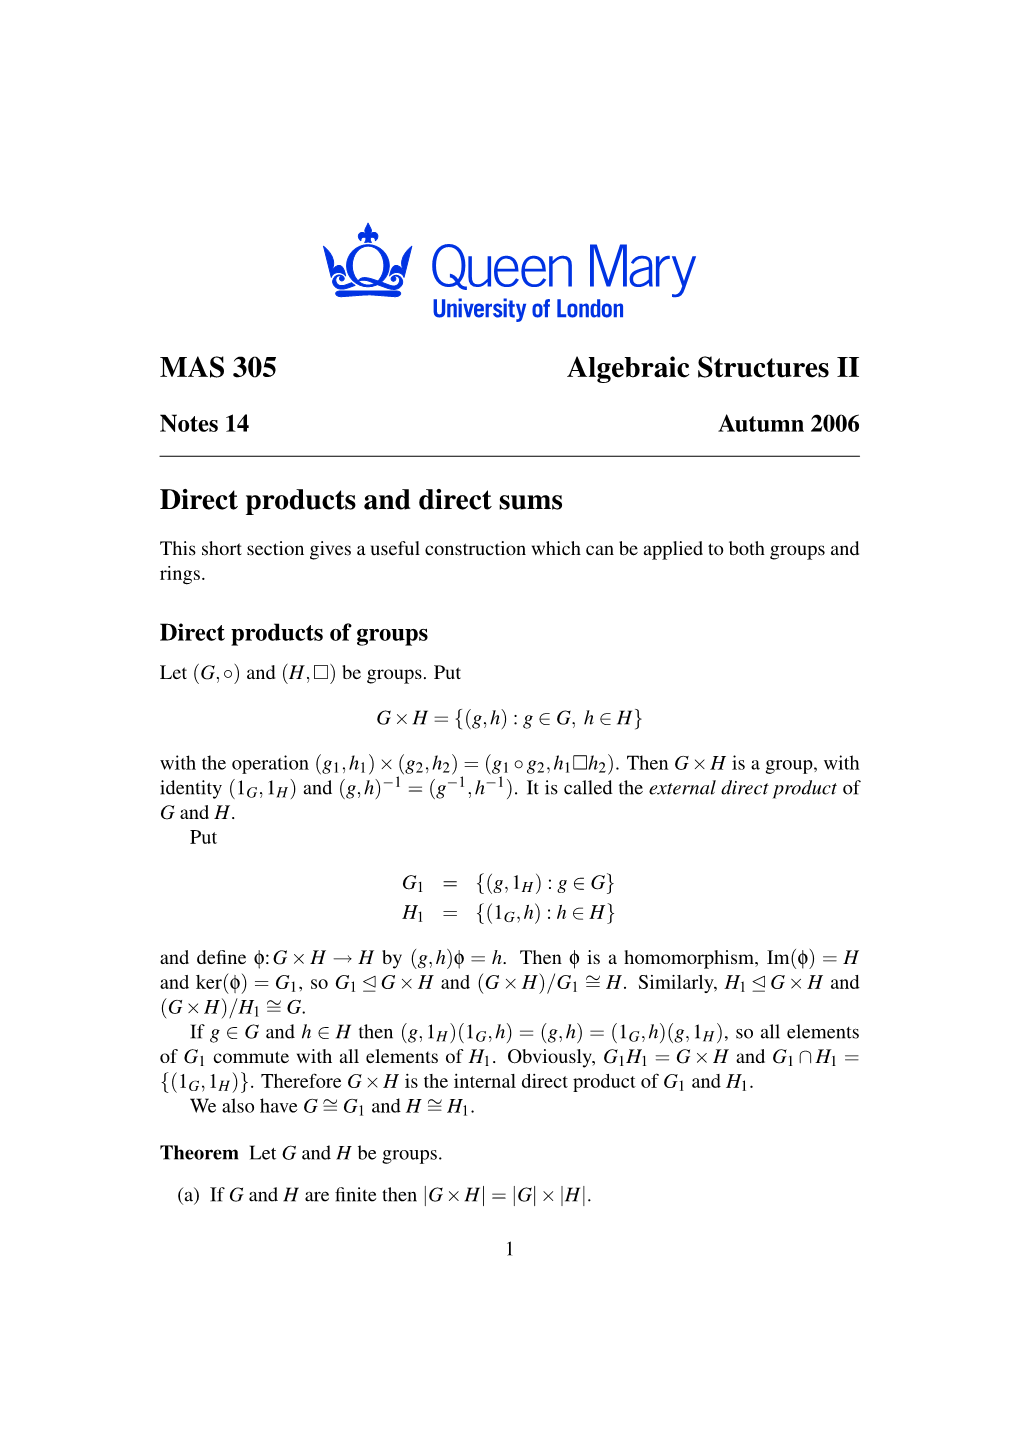 MAS 305 Algebraic Structures II Direct Products and Direct Sums